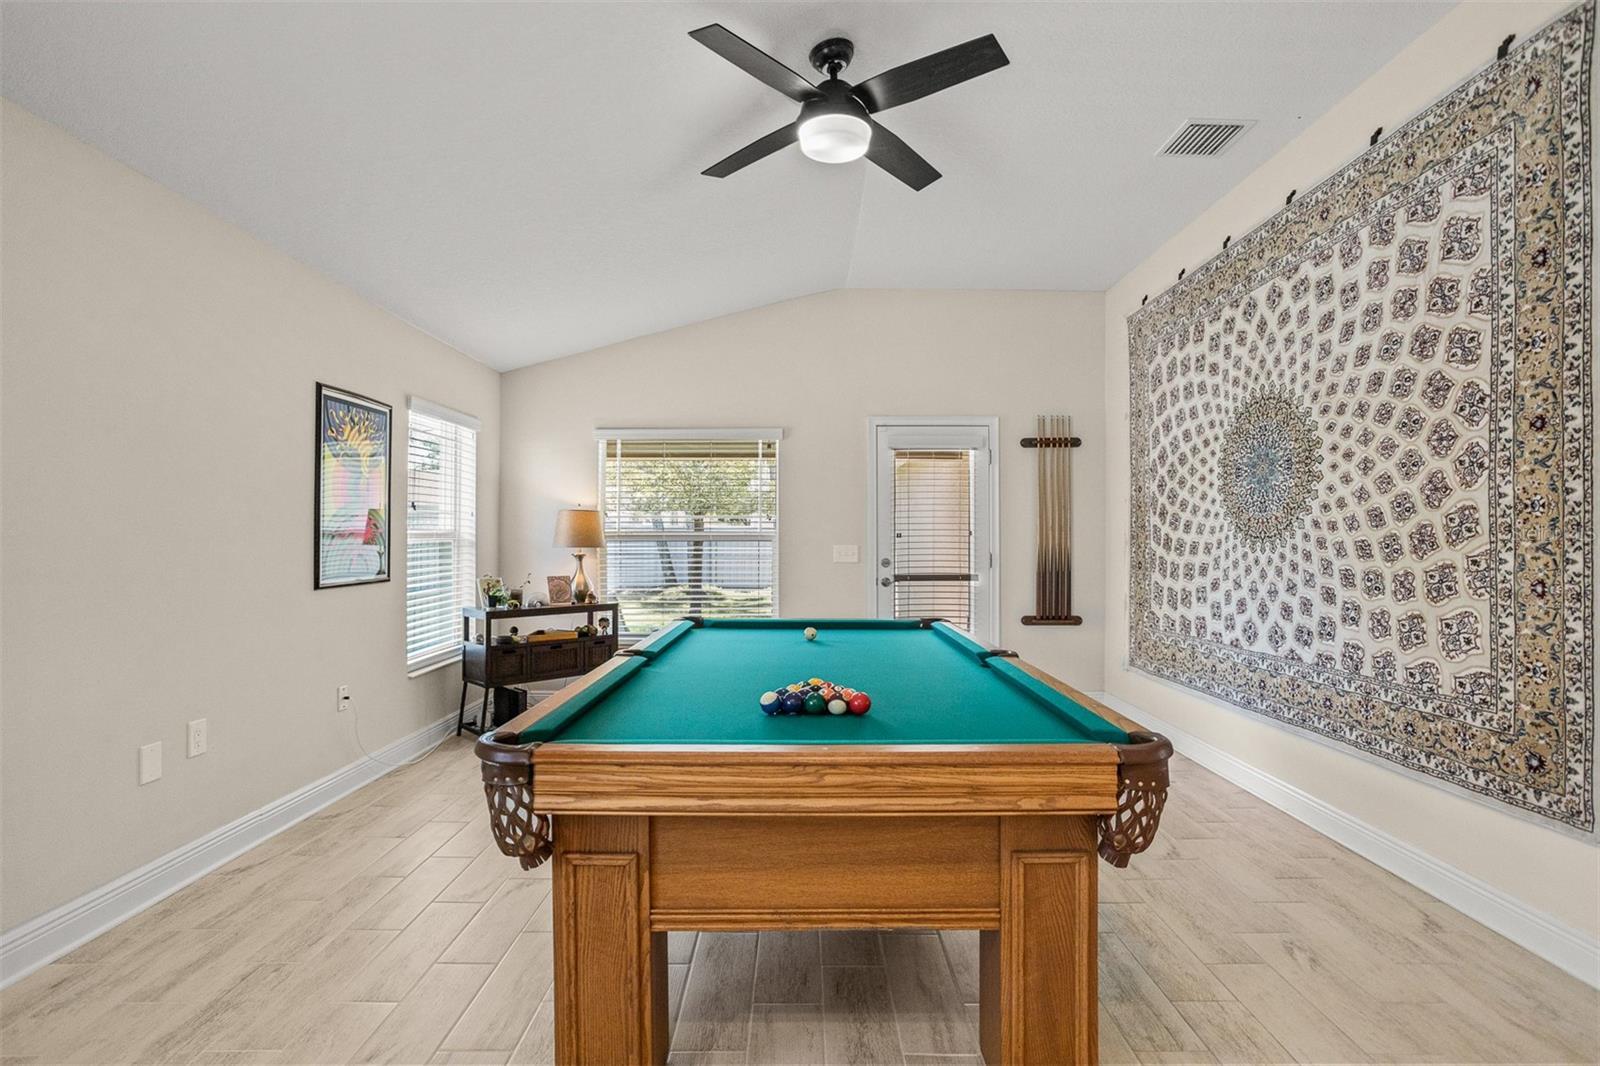 Oversized living room with plenty of space for entertaining, or even playing pool!